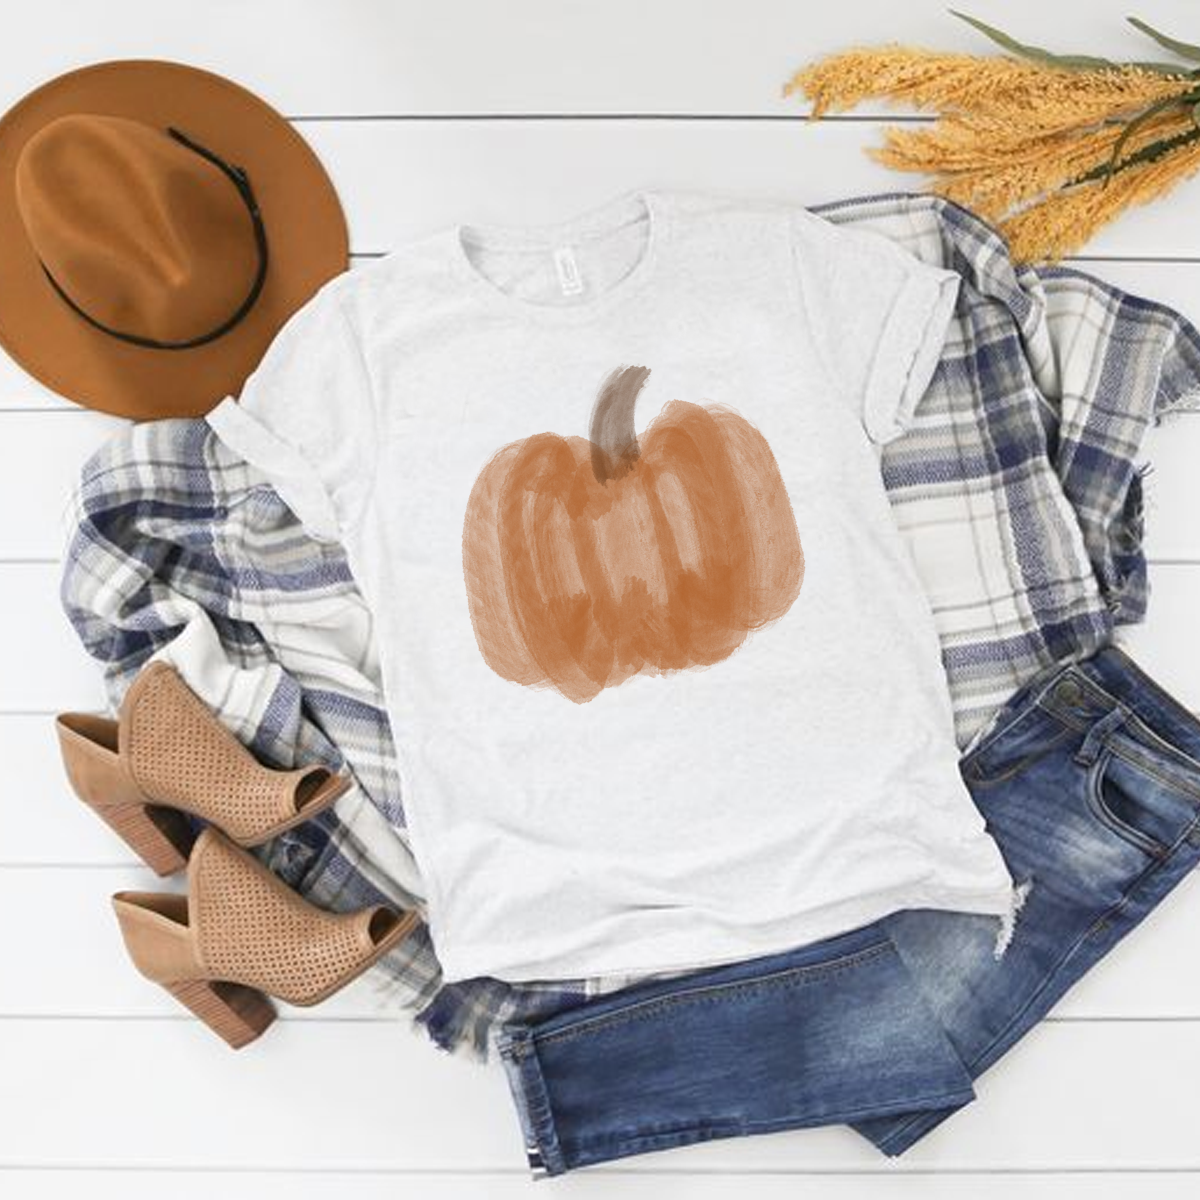 Punkin’ Tee - White - Southern Grace Creations